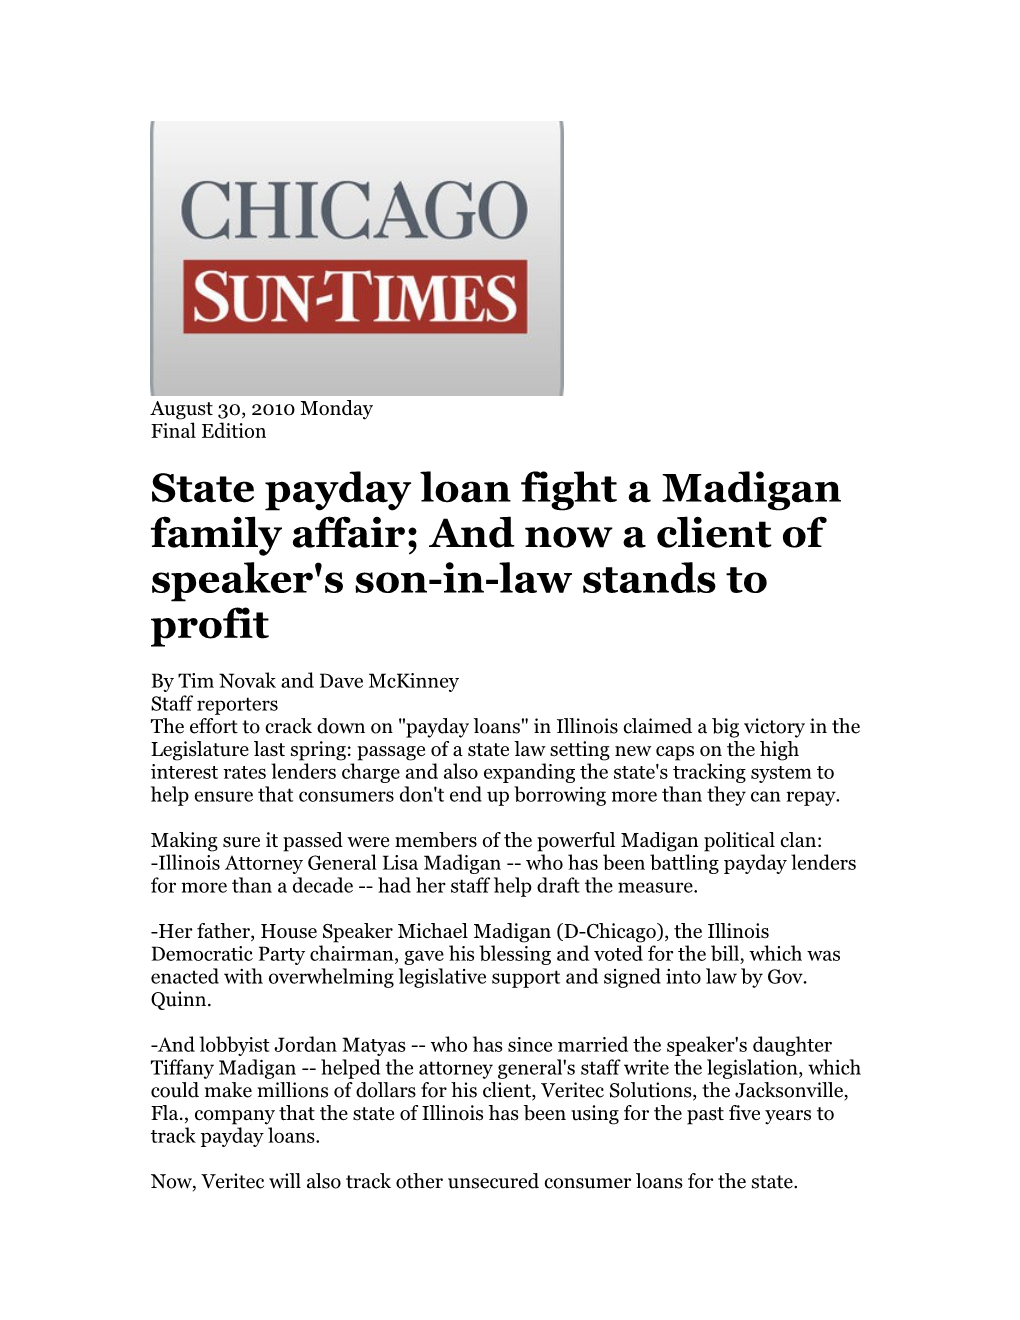 State Payday Loan Fight a Madigan Family Affair; and Now a Client of Speaker's Son-In-Law